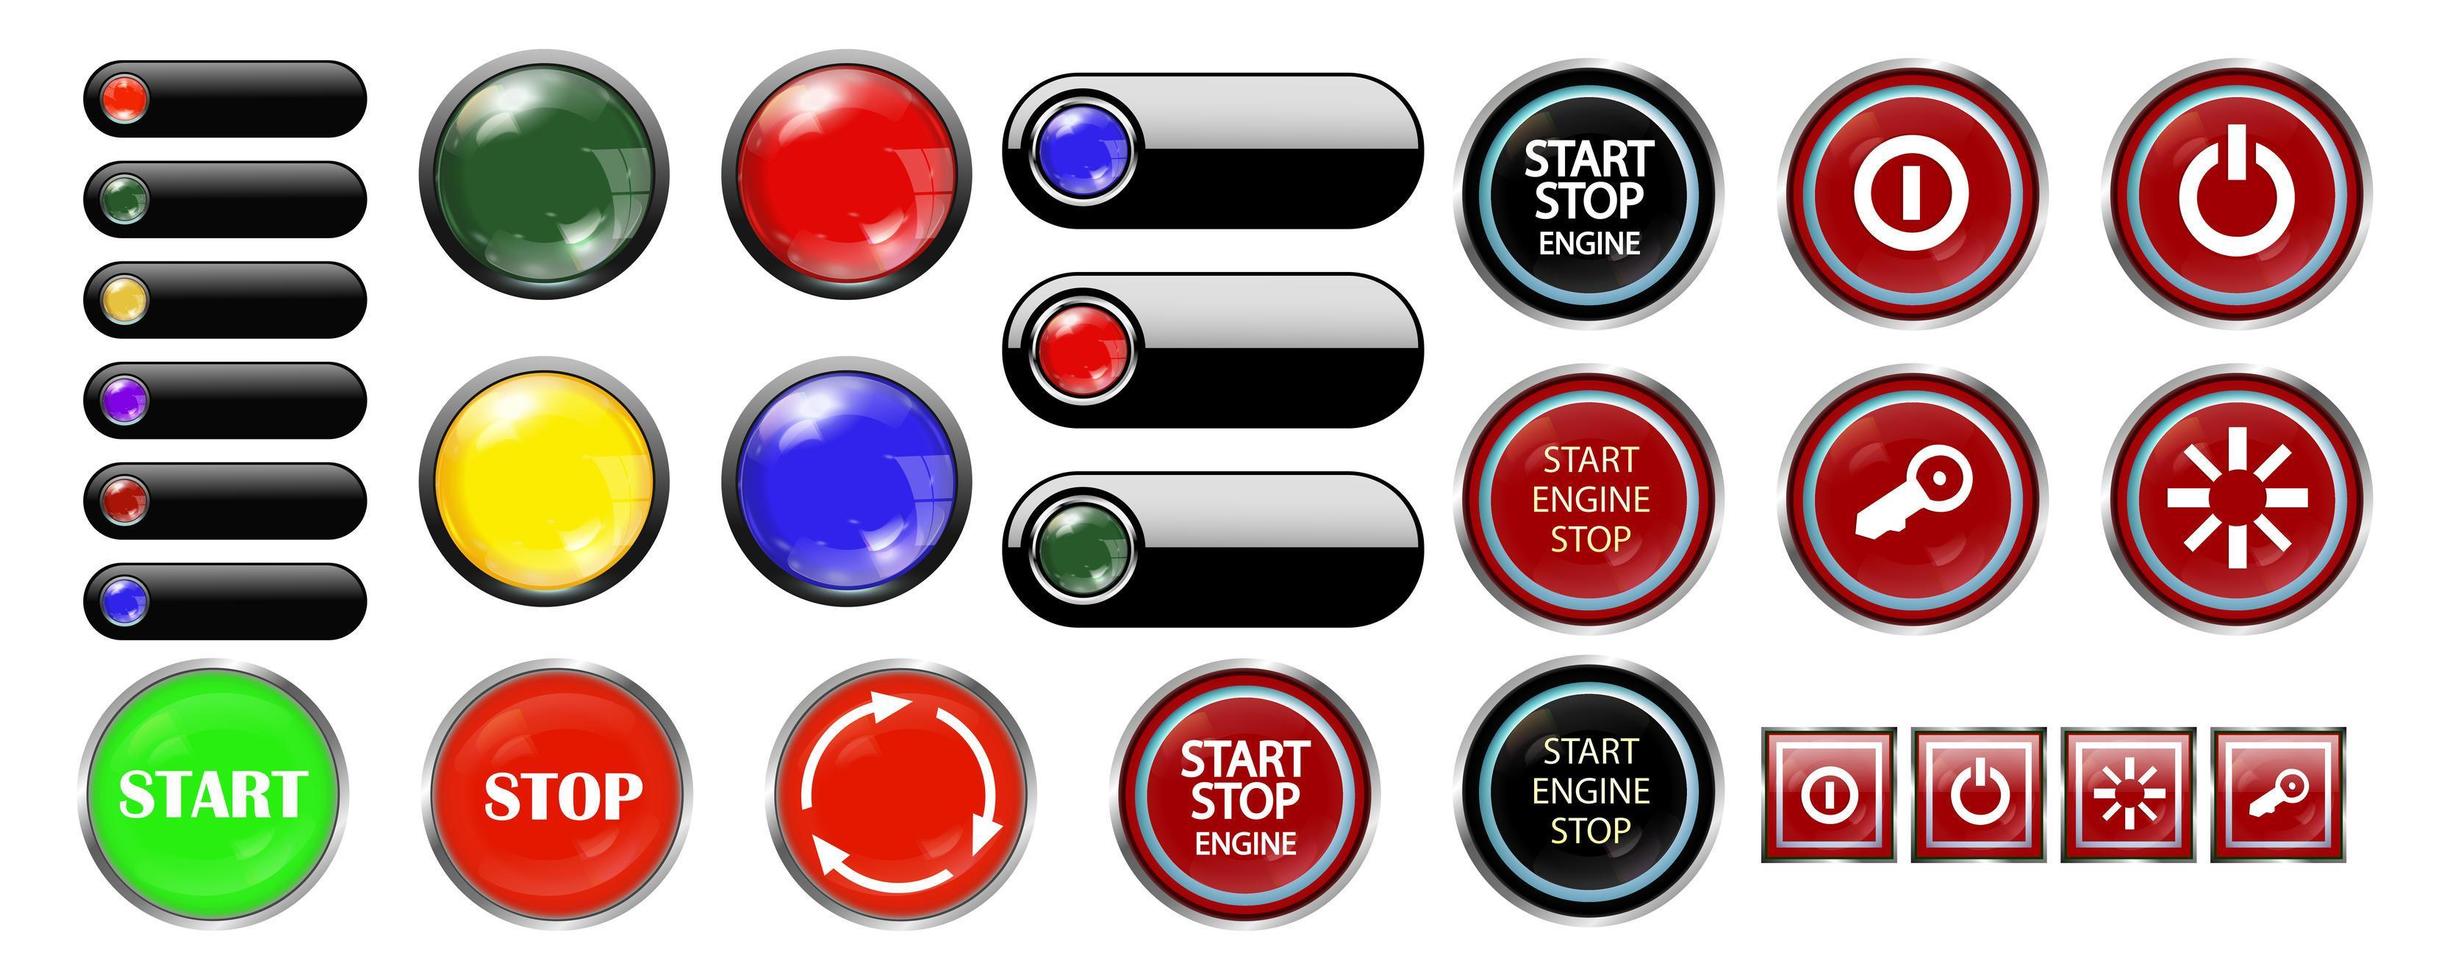 Interface colorful, web button with icon, power button with switch vector